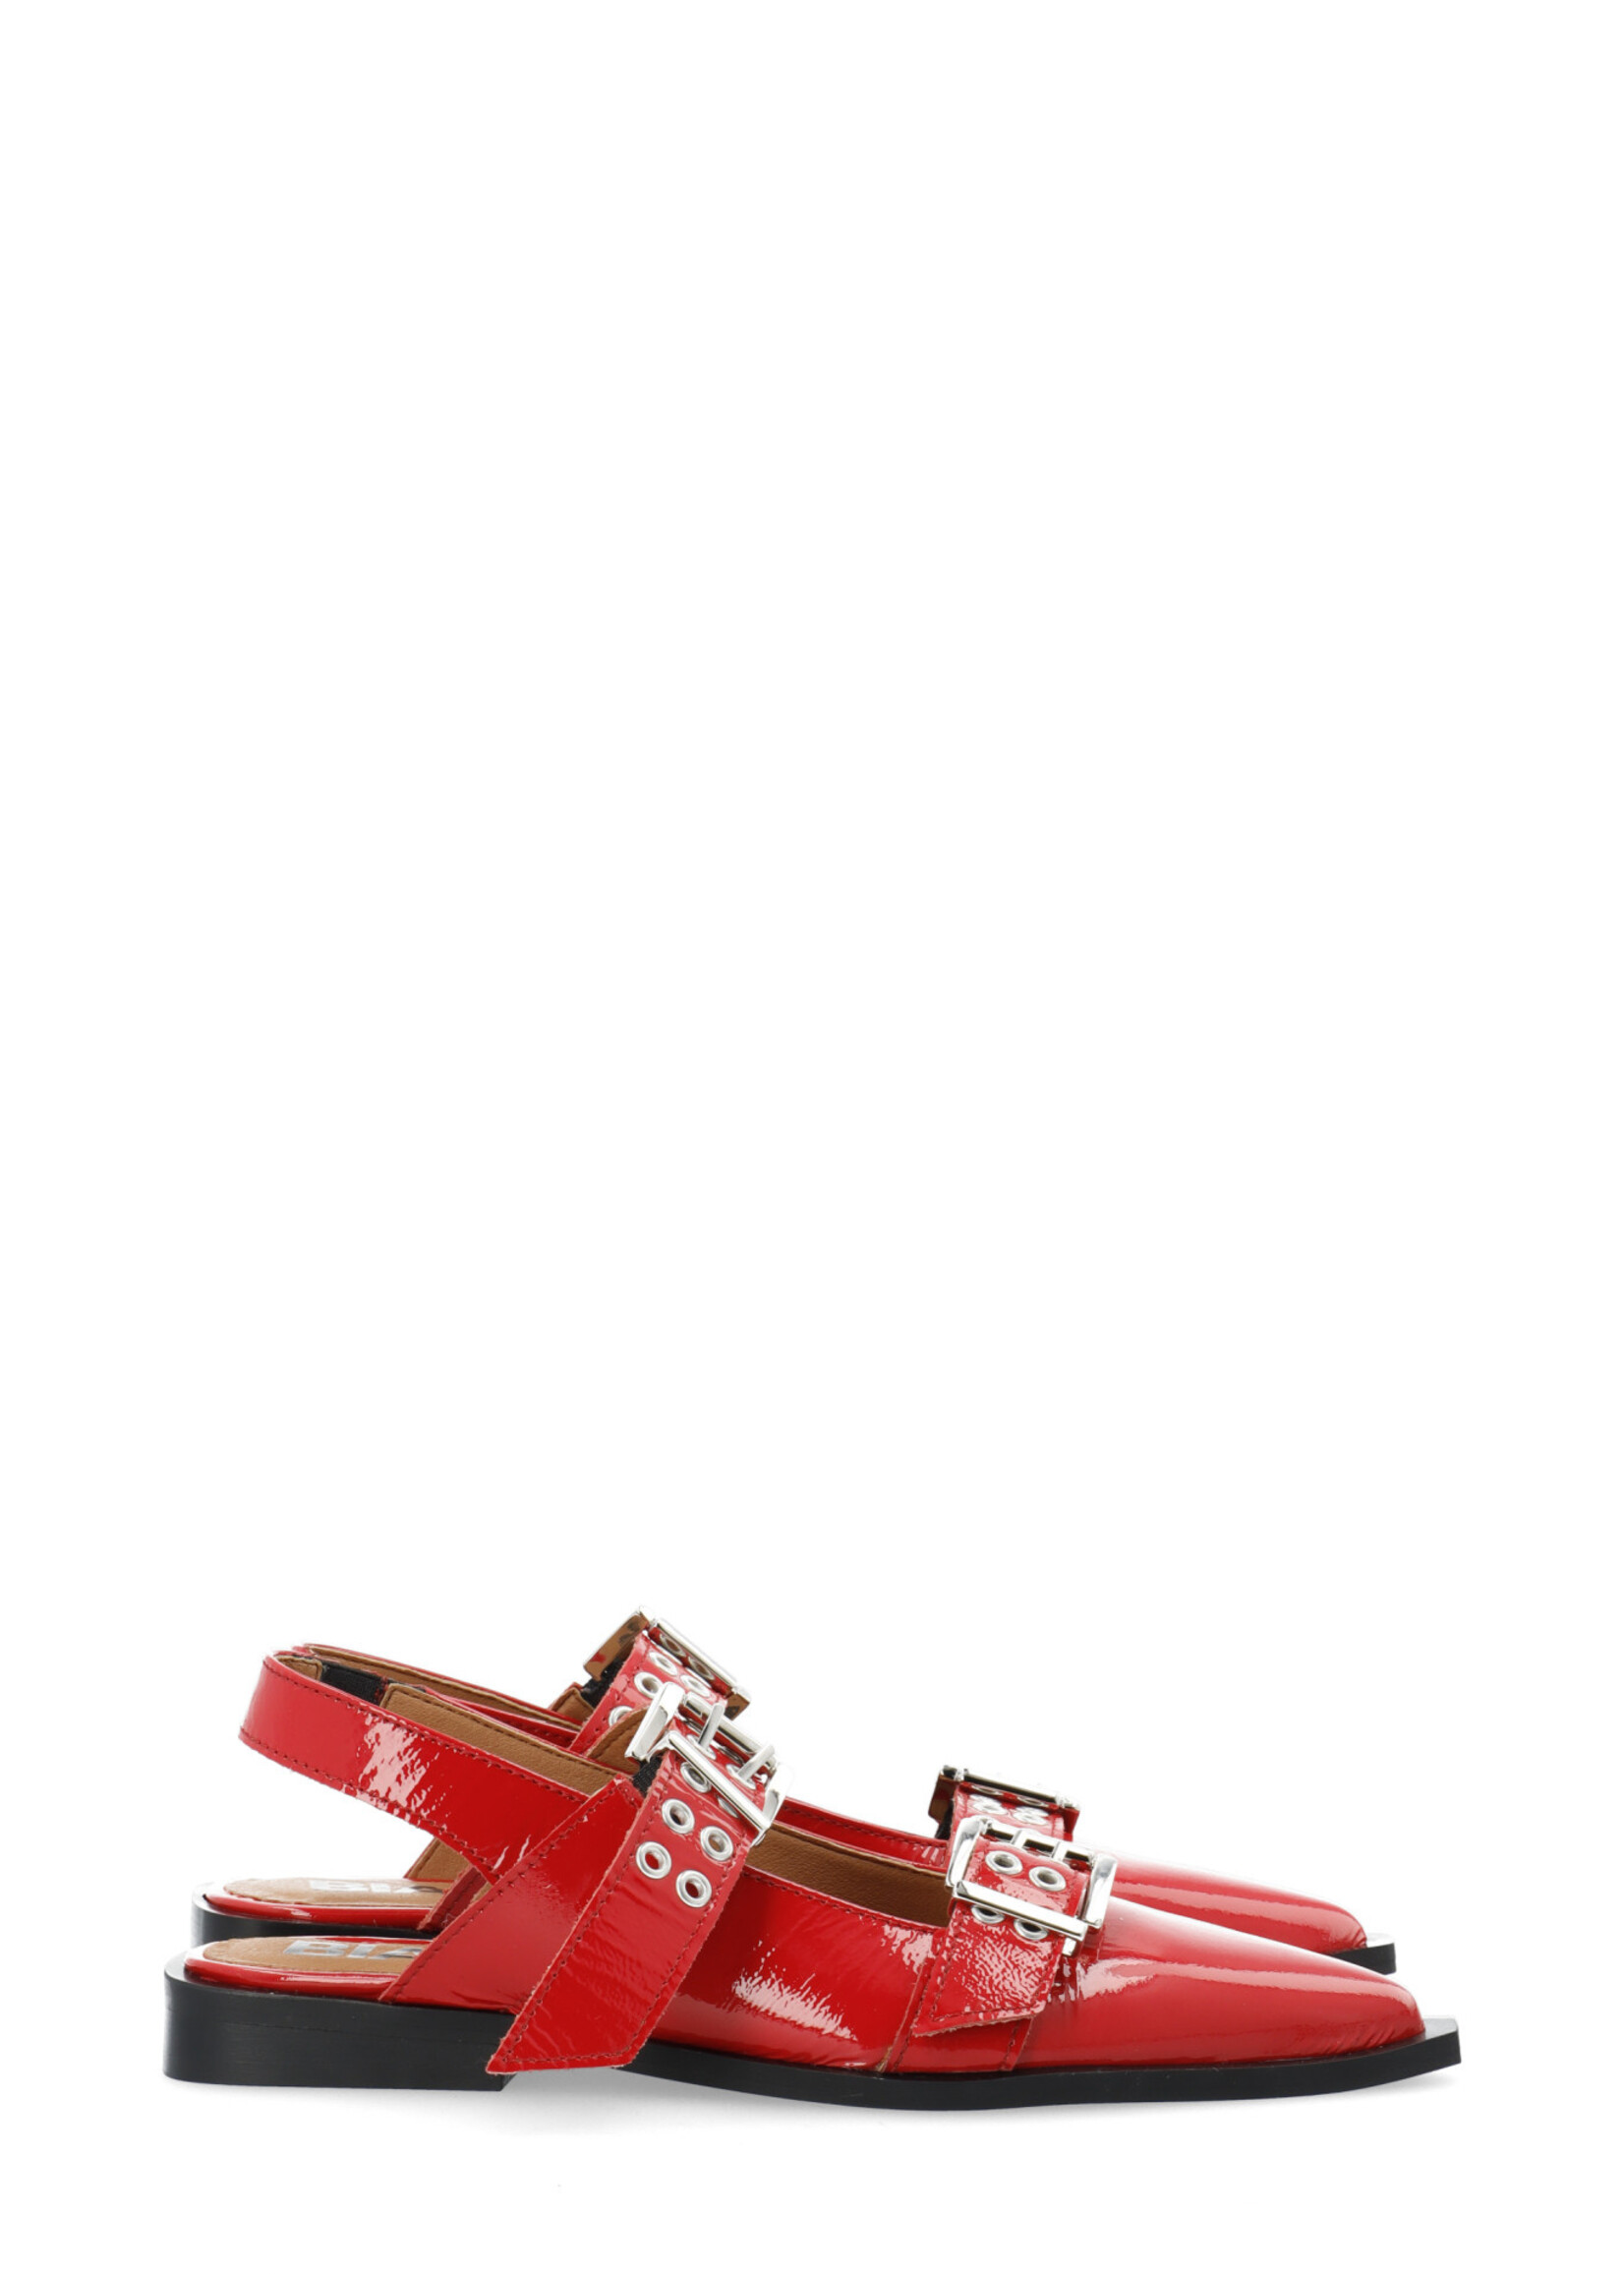 BIANCO BIAVICTORIA Double Buckle Slingback - RED